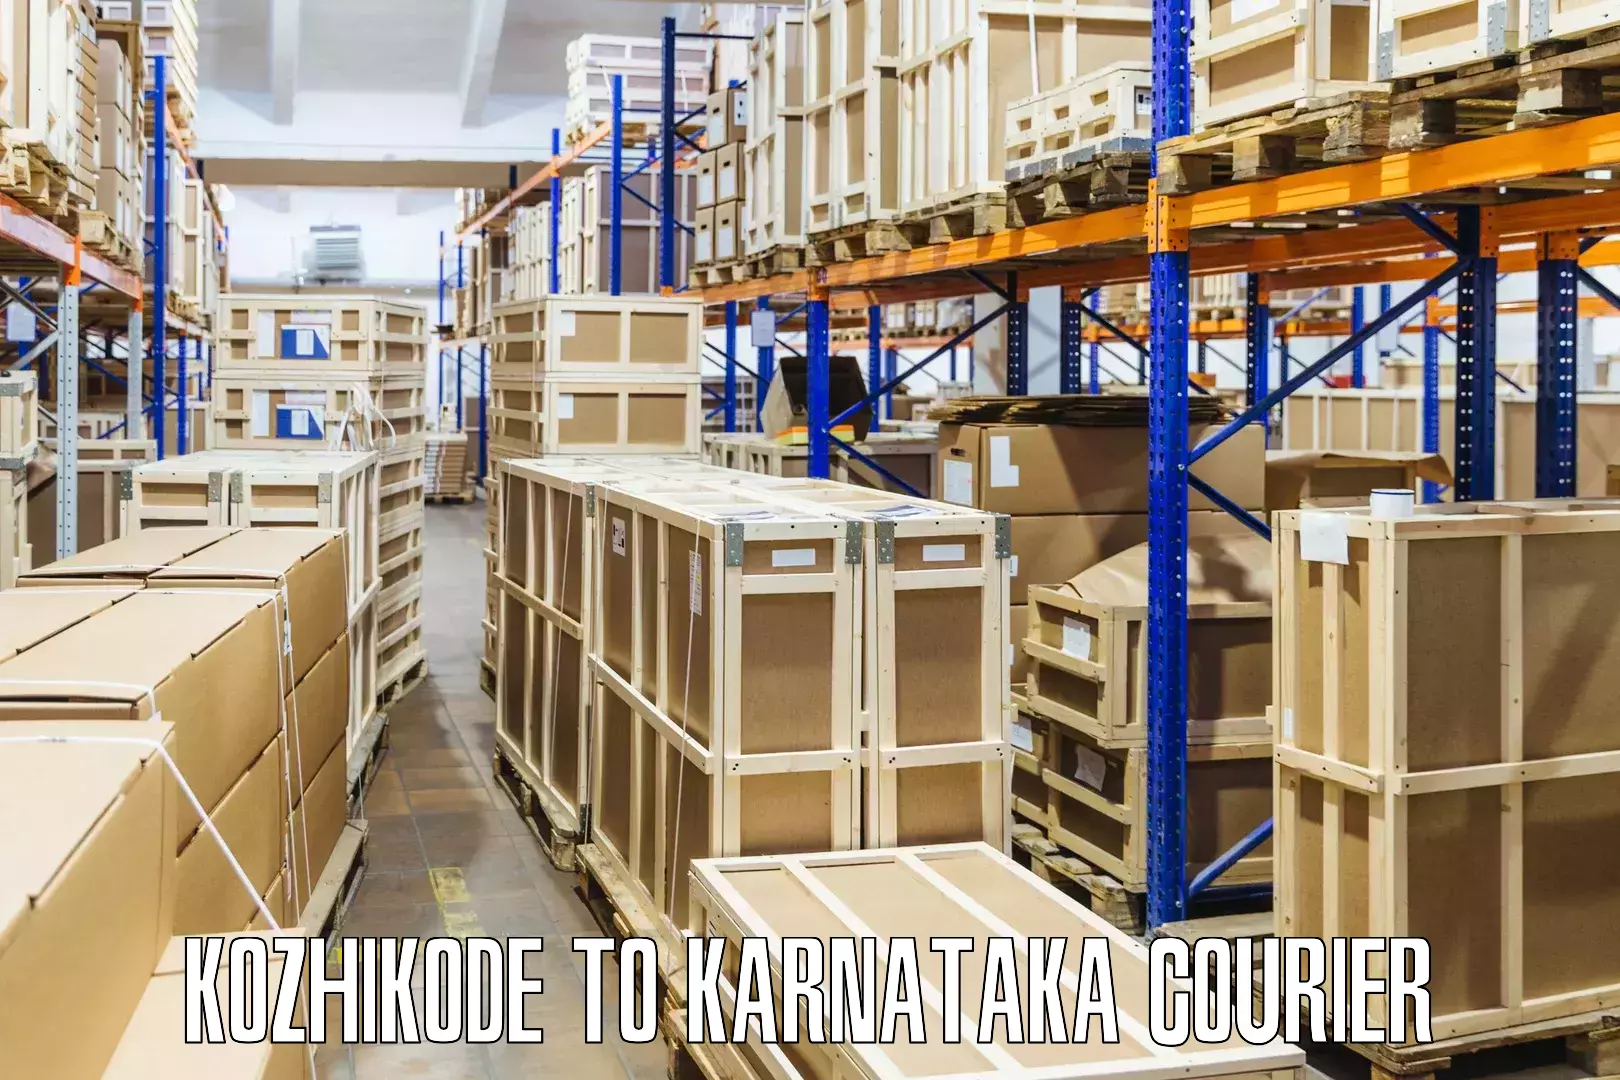 Full-service courier options Kozhikode to Bengaluru